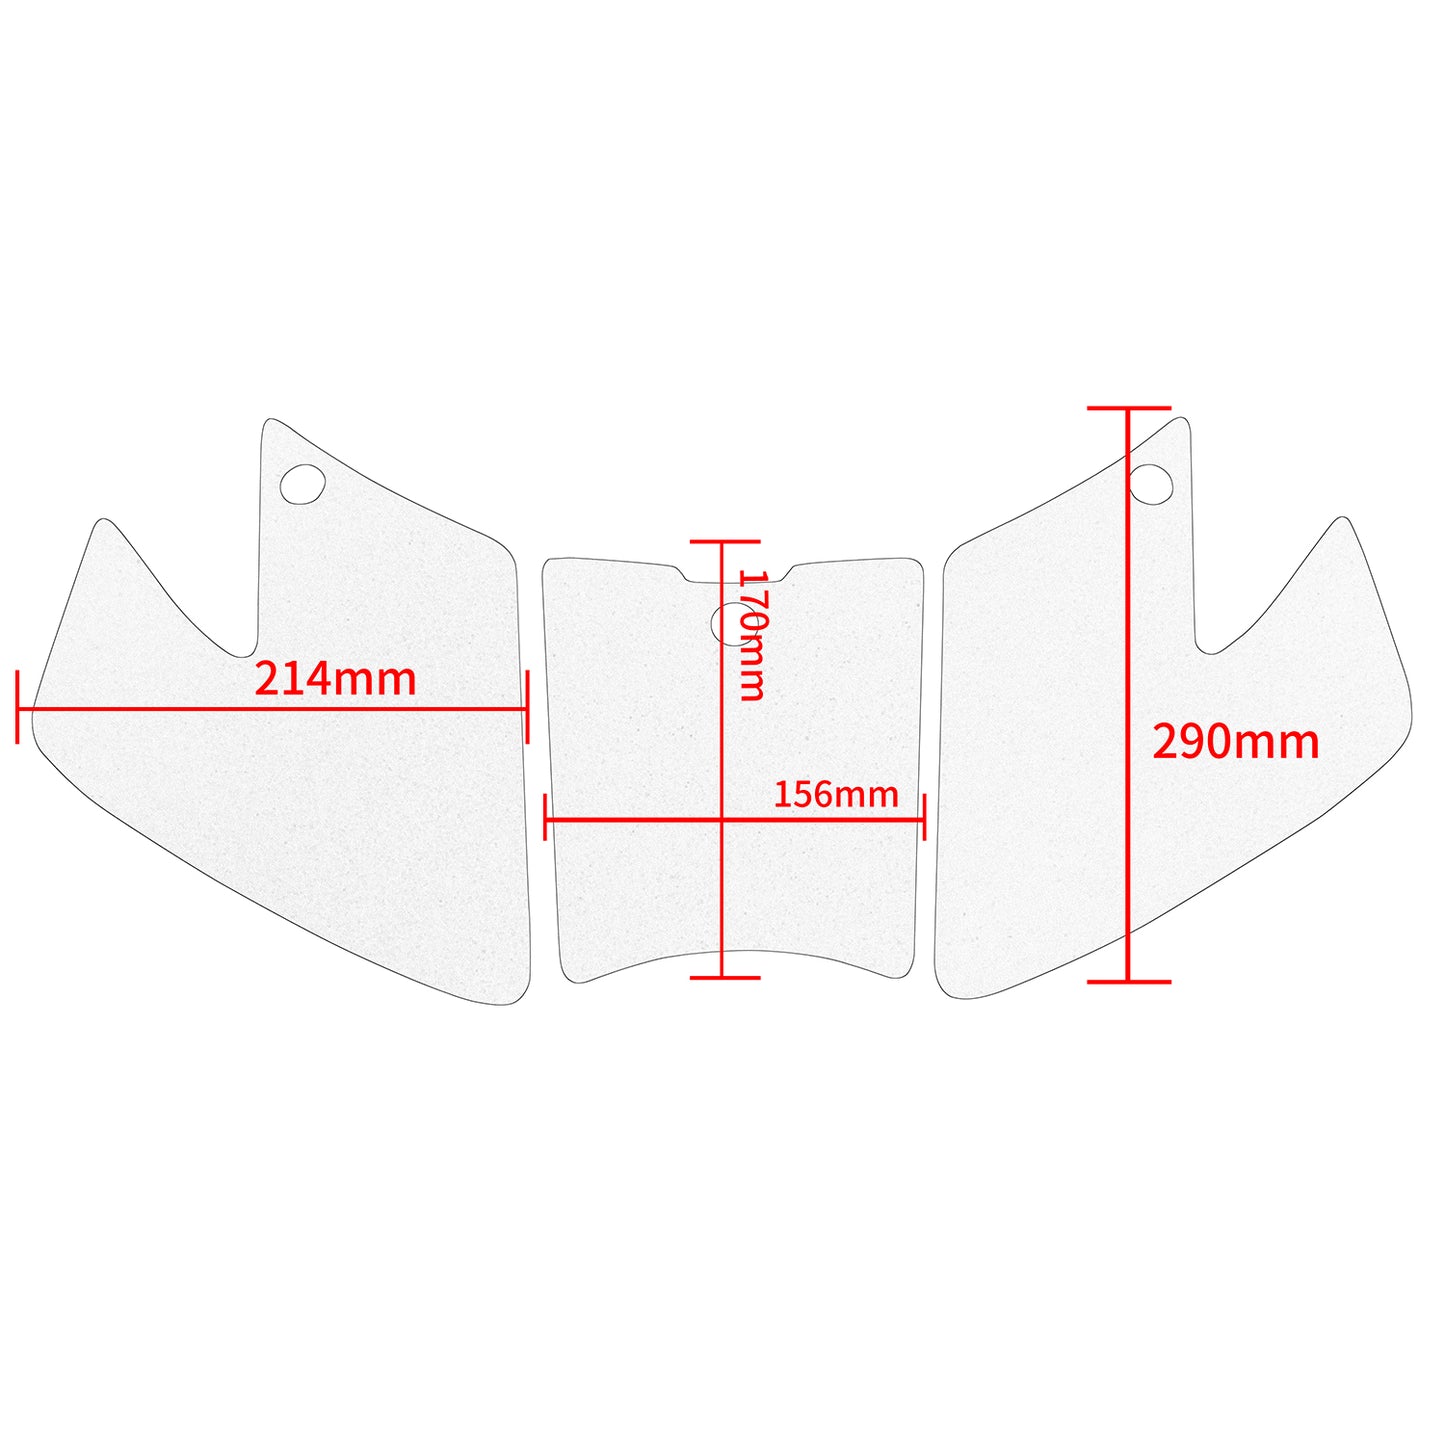 Wolfline Motorcycle Accessories Anti Slip Tank Pad Stickers Side Gas Tank Pad Knee Grip Decals Protection For Suzuki V-STROM DL1050 XT 2020 2021 2022